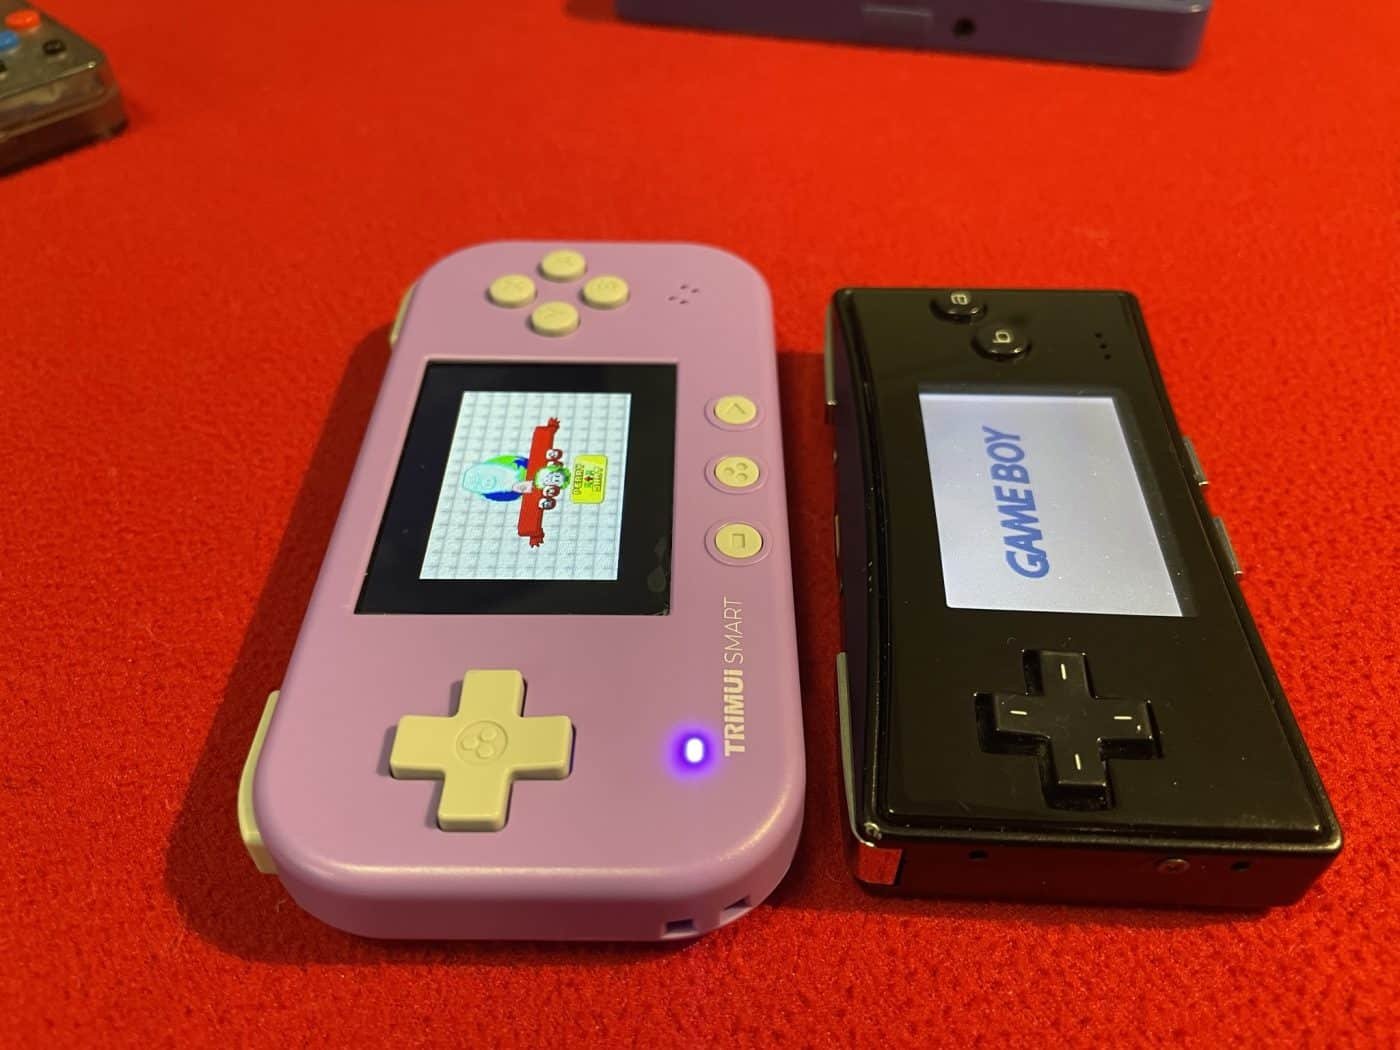 Using integer scaling means the image is "actual size" on a pixel by pixel basis... At which point this screen is even smaller than the gameboy micro.